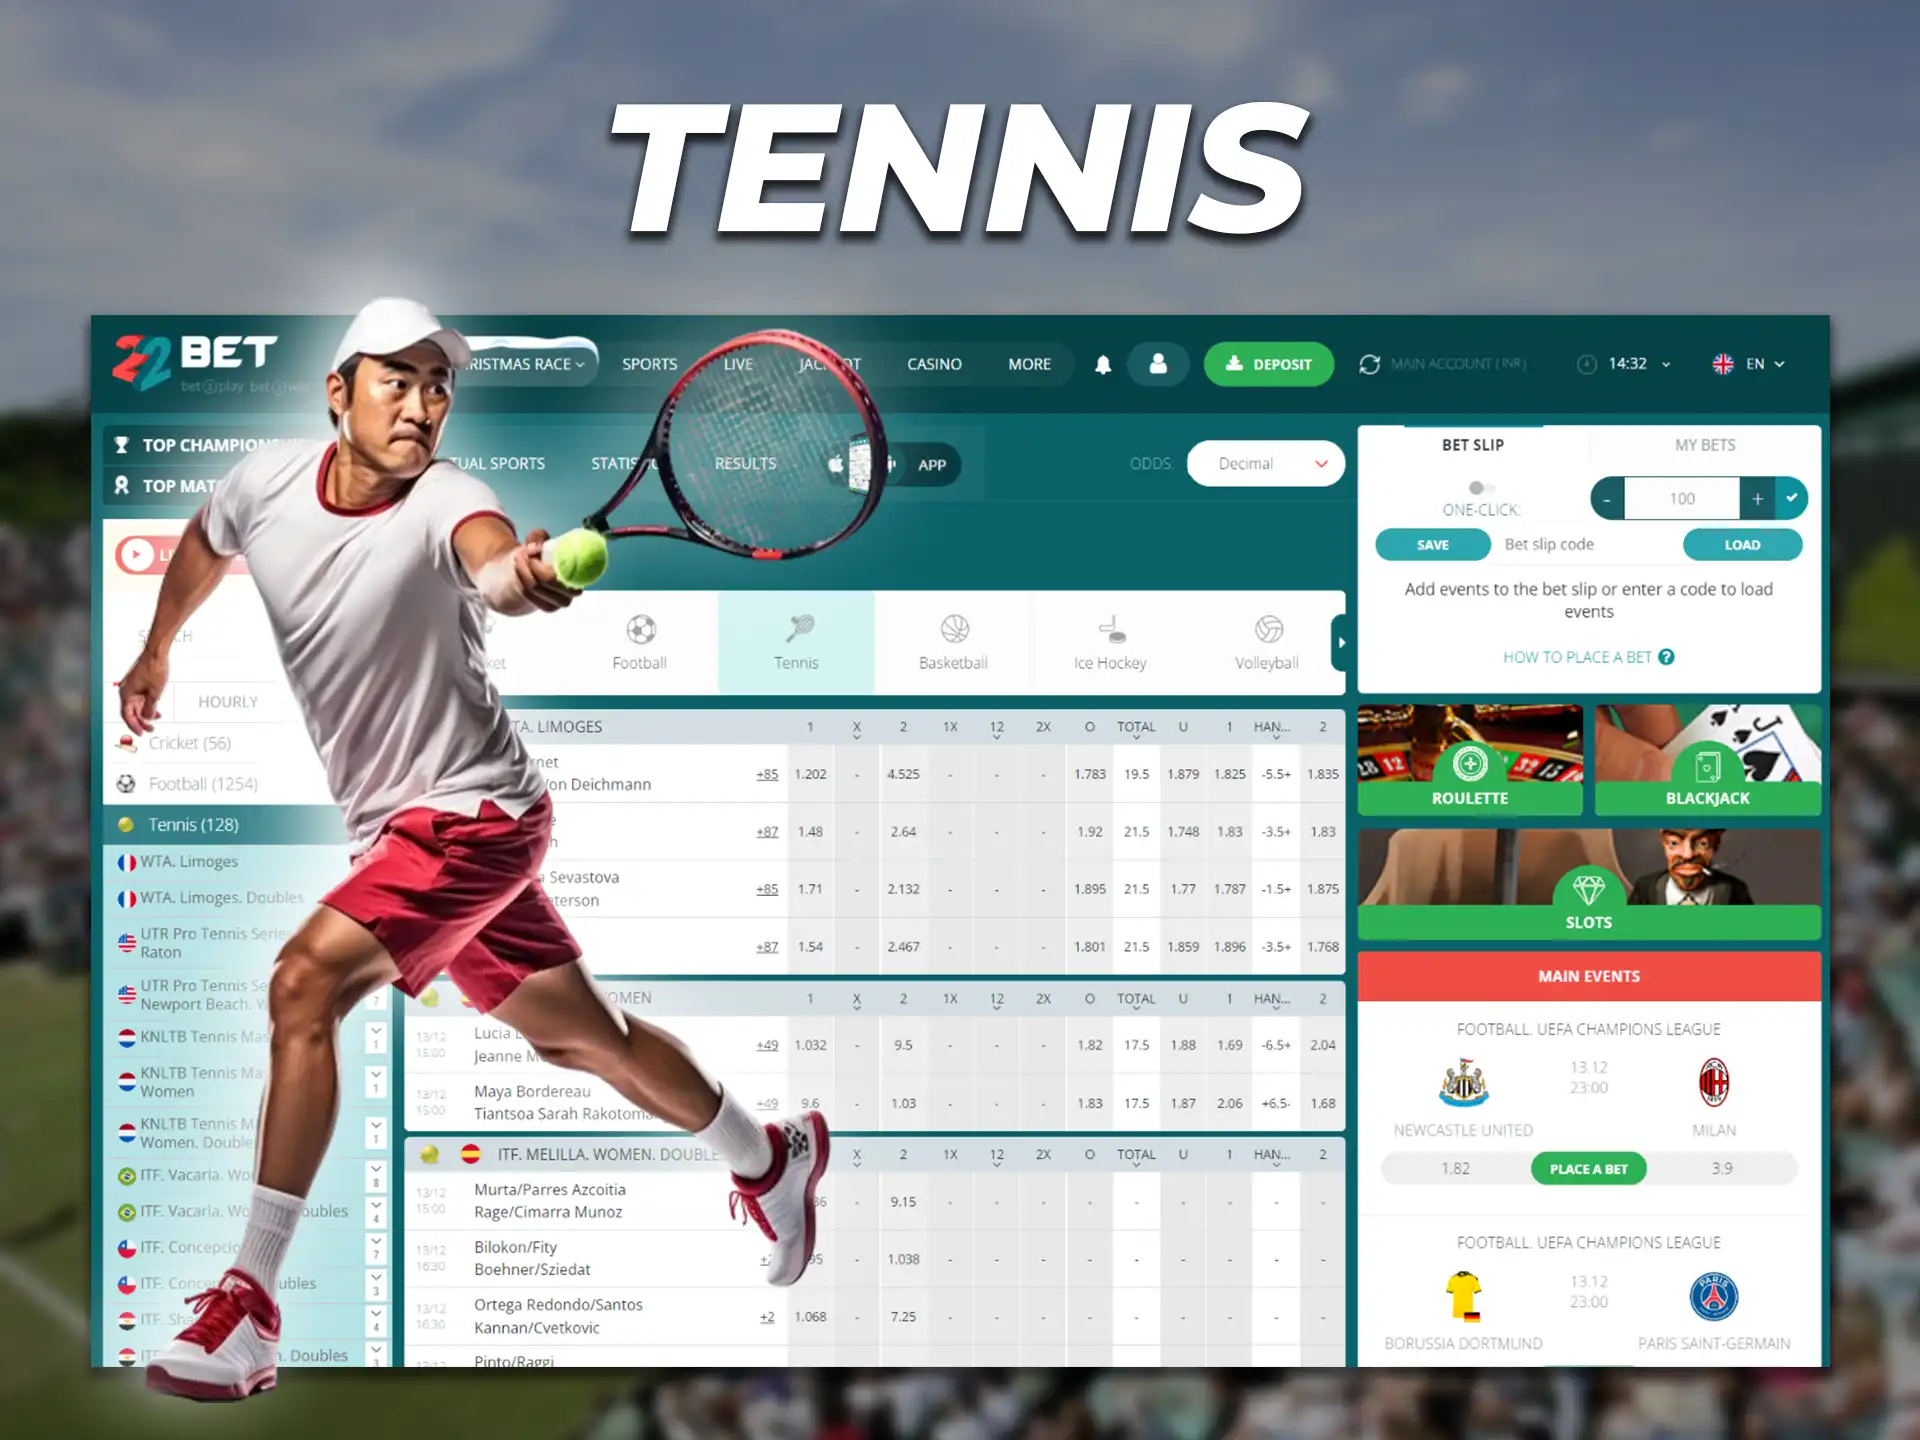 Information about upcoming events and tennis odds on the 22Bet website.